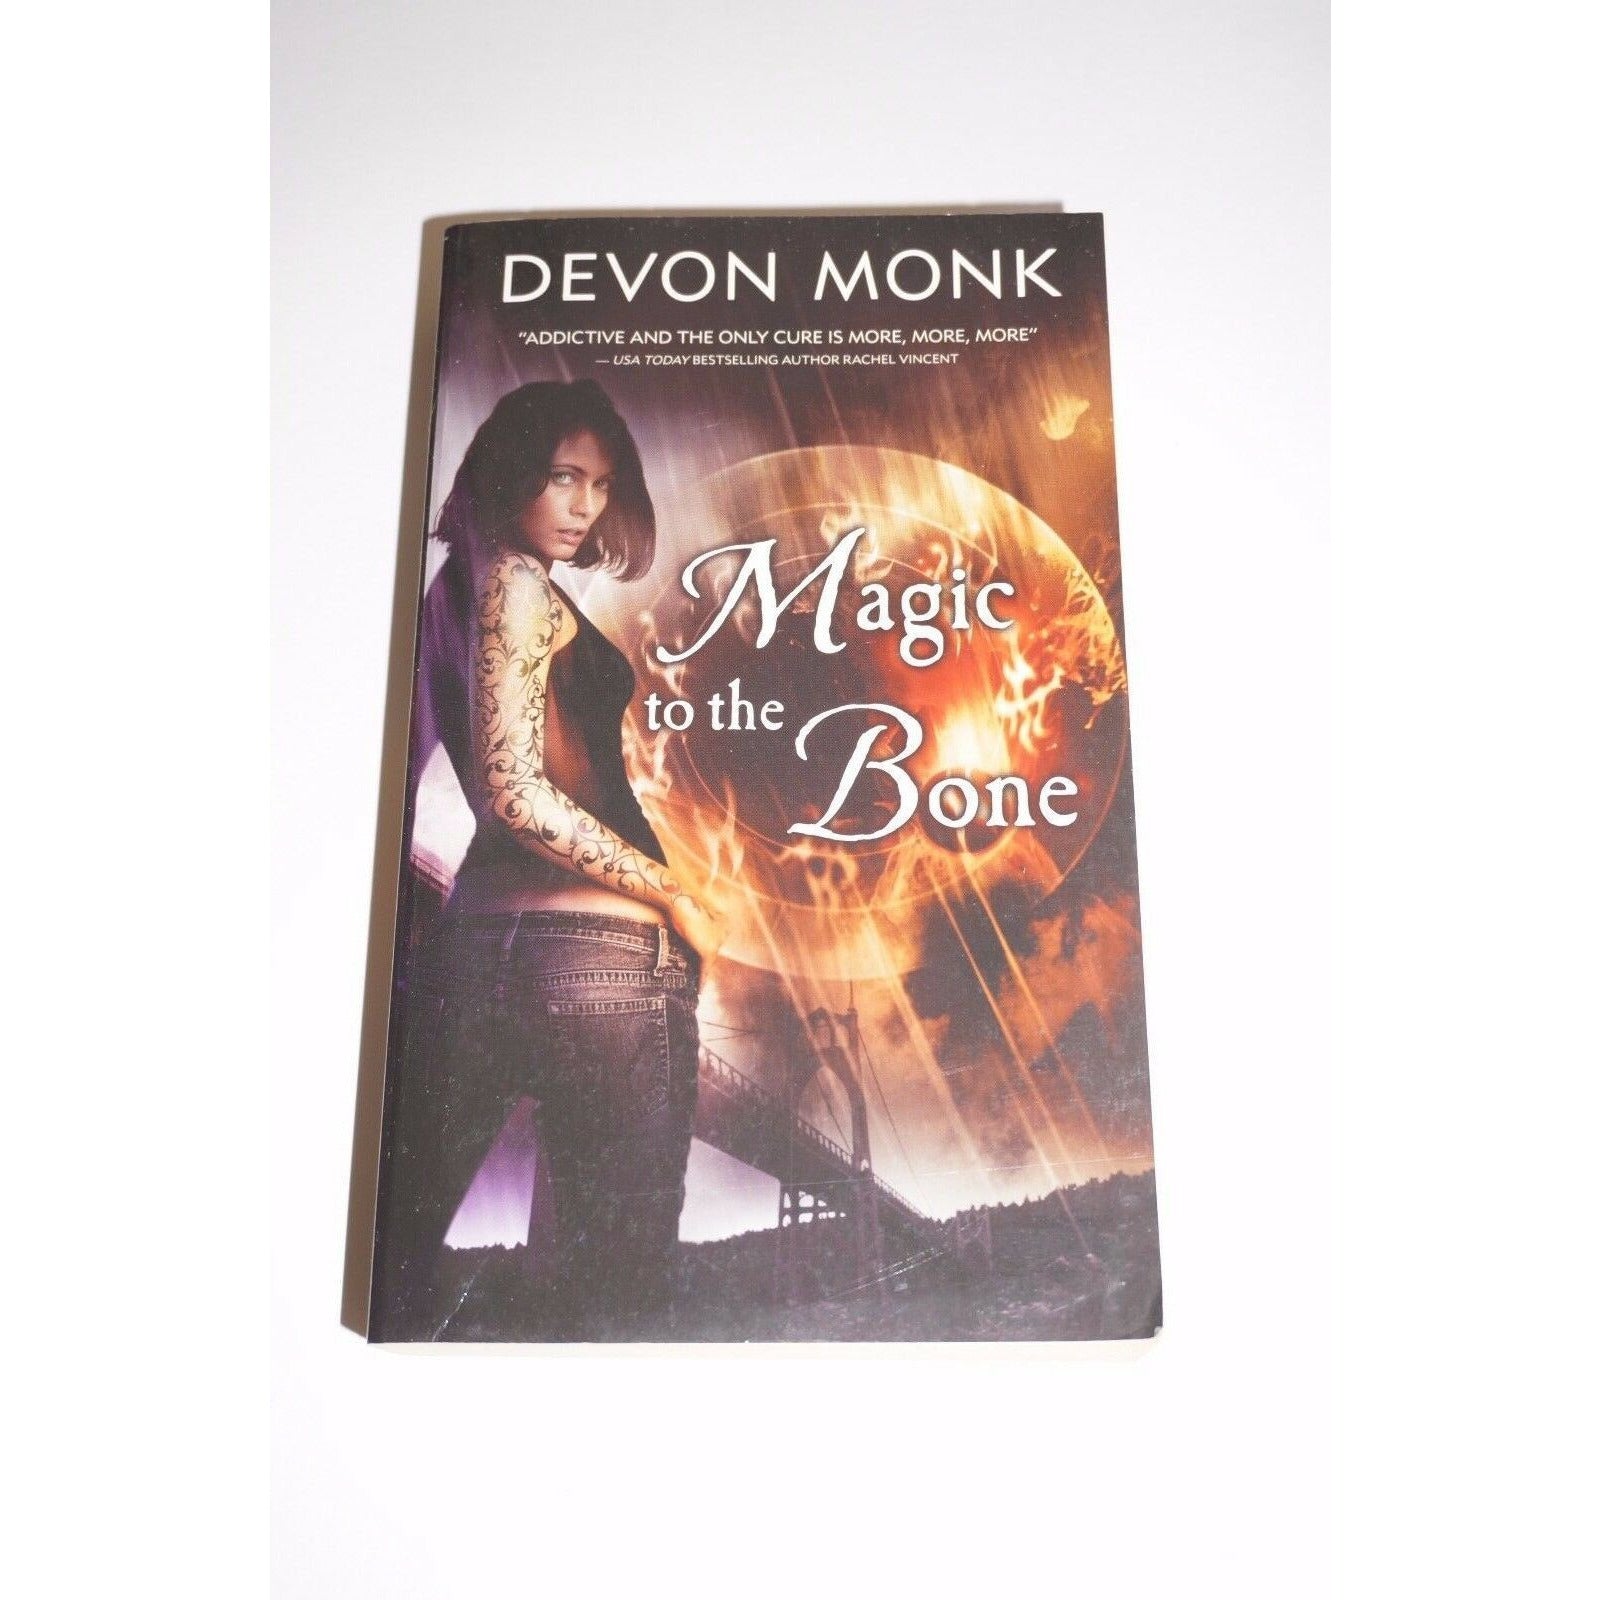 Magic to the bone By Devon Monk paperback fiction Read used book